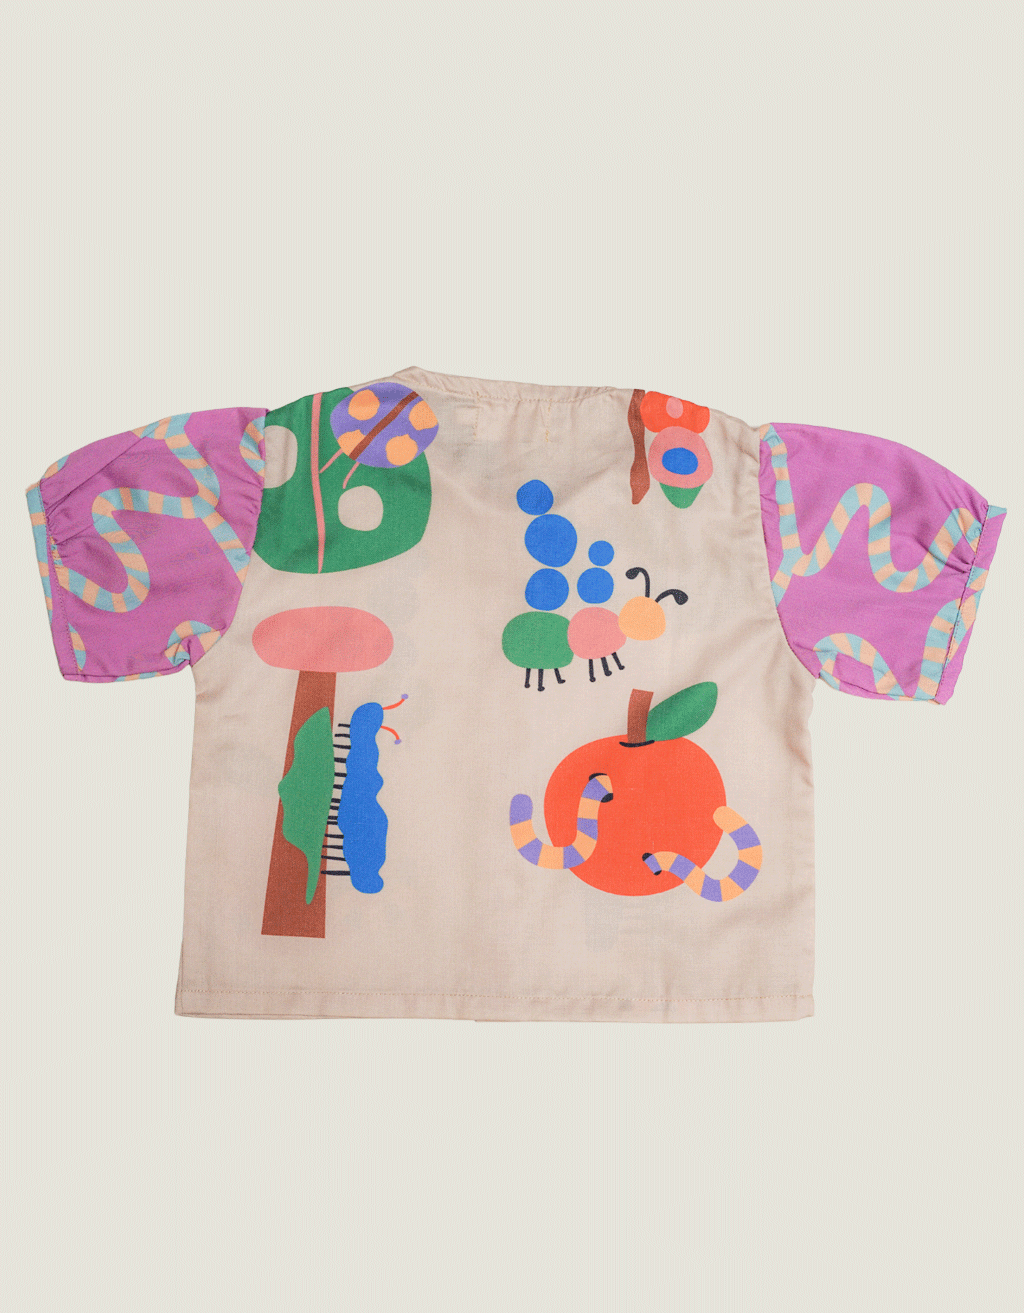 Smitten Kids - Puffy Collar Top - Insects Land